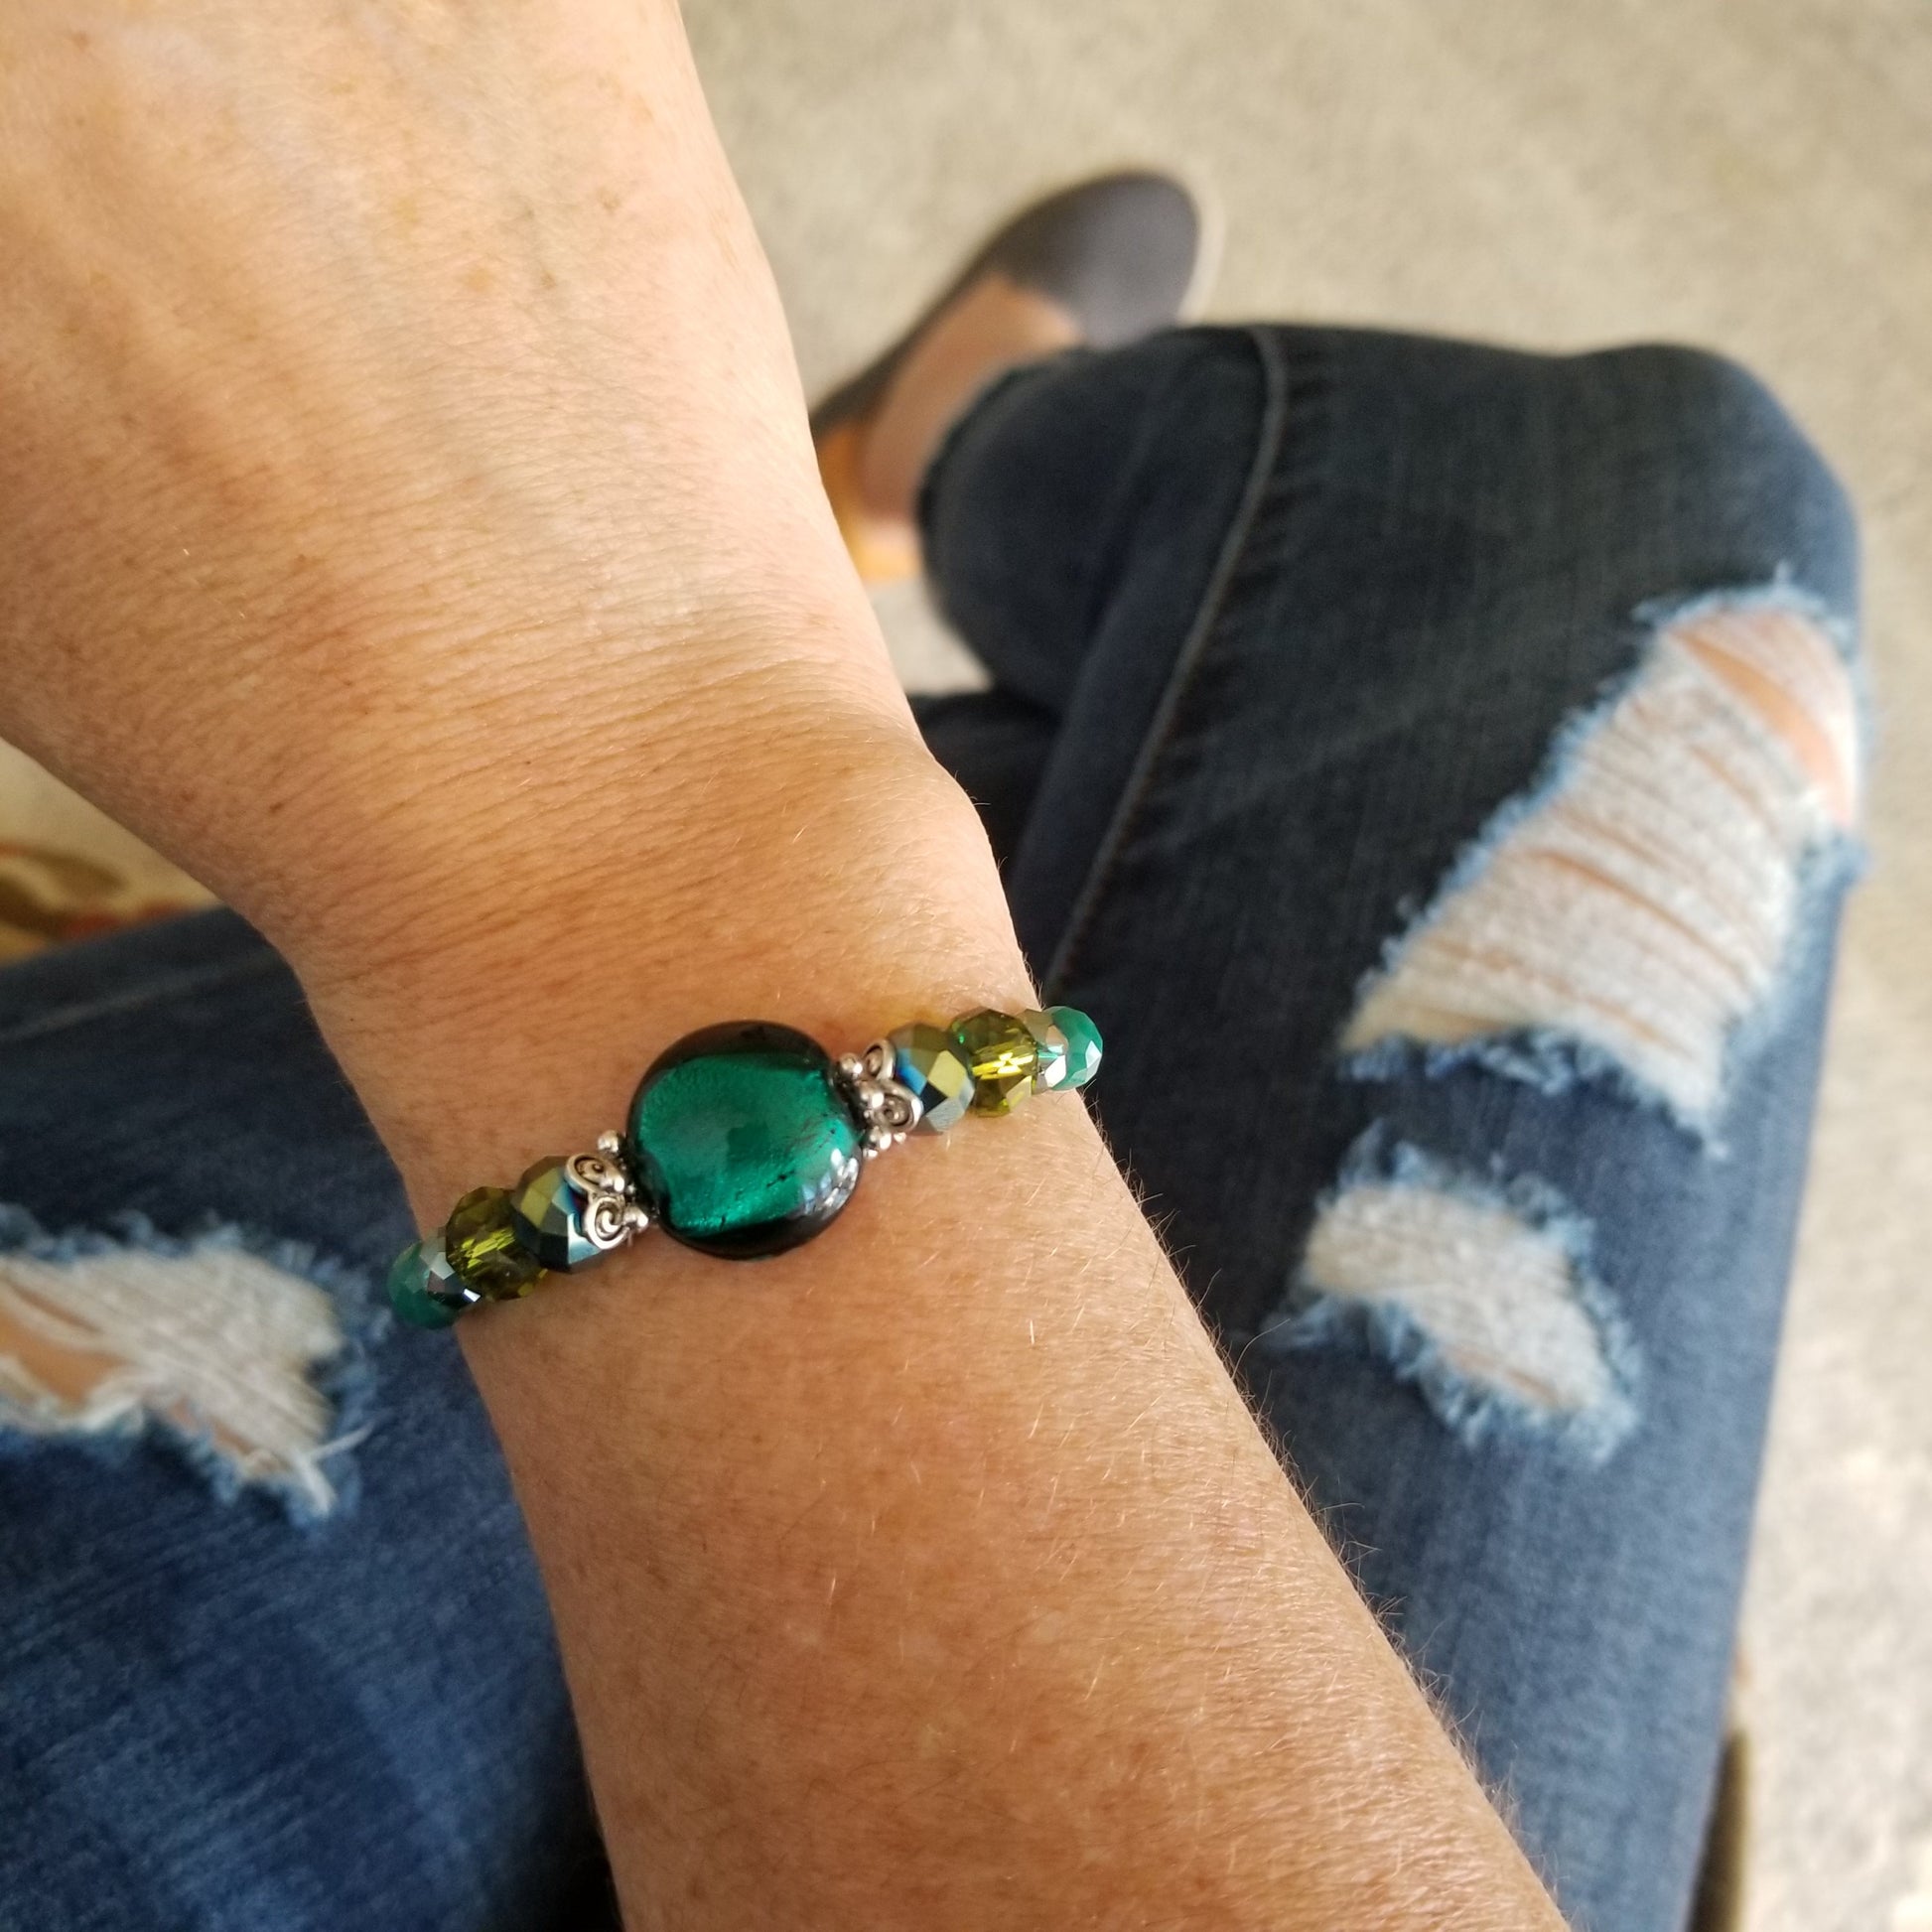 emerald green foil glass with coordinating glass beads wrap bracelet on wrist